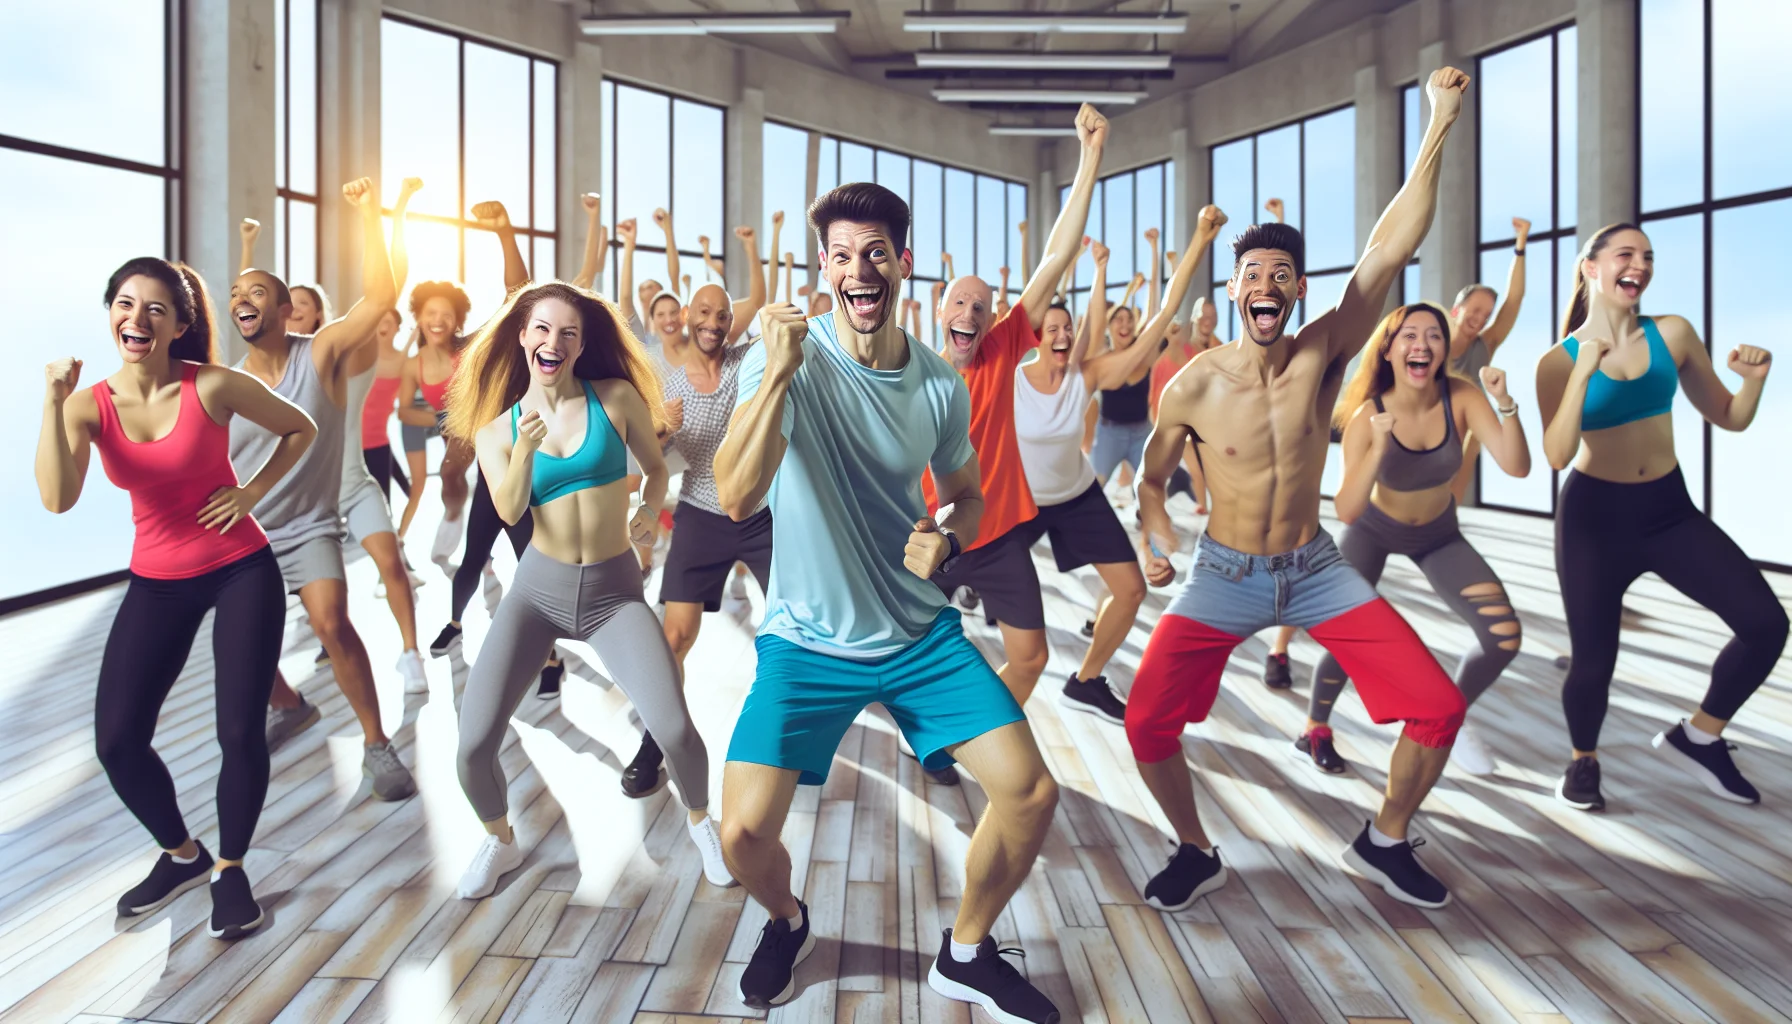 Generate a humorous and persuasive image depicting an animated sequence of a mixed group of individuals, of varying descents such as Hispanic, Caucasian, and South Asian, and of both genders, joyfully participating in a Zumba fitness class. They are in a bright, spacious gym with floor-to-ceiling mirrors. Some are successfully following the moves, while others are hilariously struggling to keep up the rhythm, with goofy expressions and exaggerated movements. Their fun and laughter are infectious, promoting the message that exercise can be enjoyable and engaging.